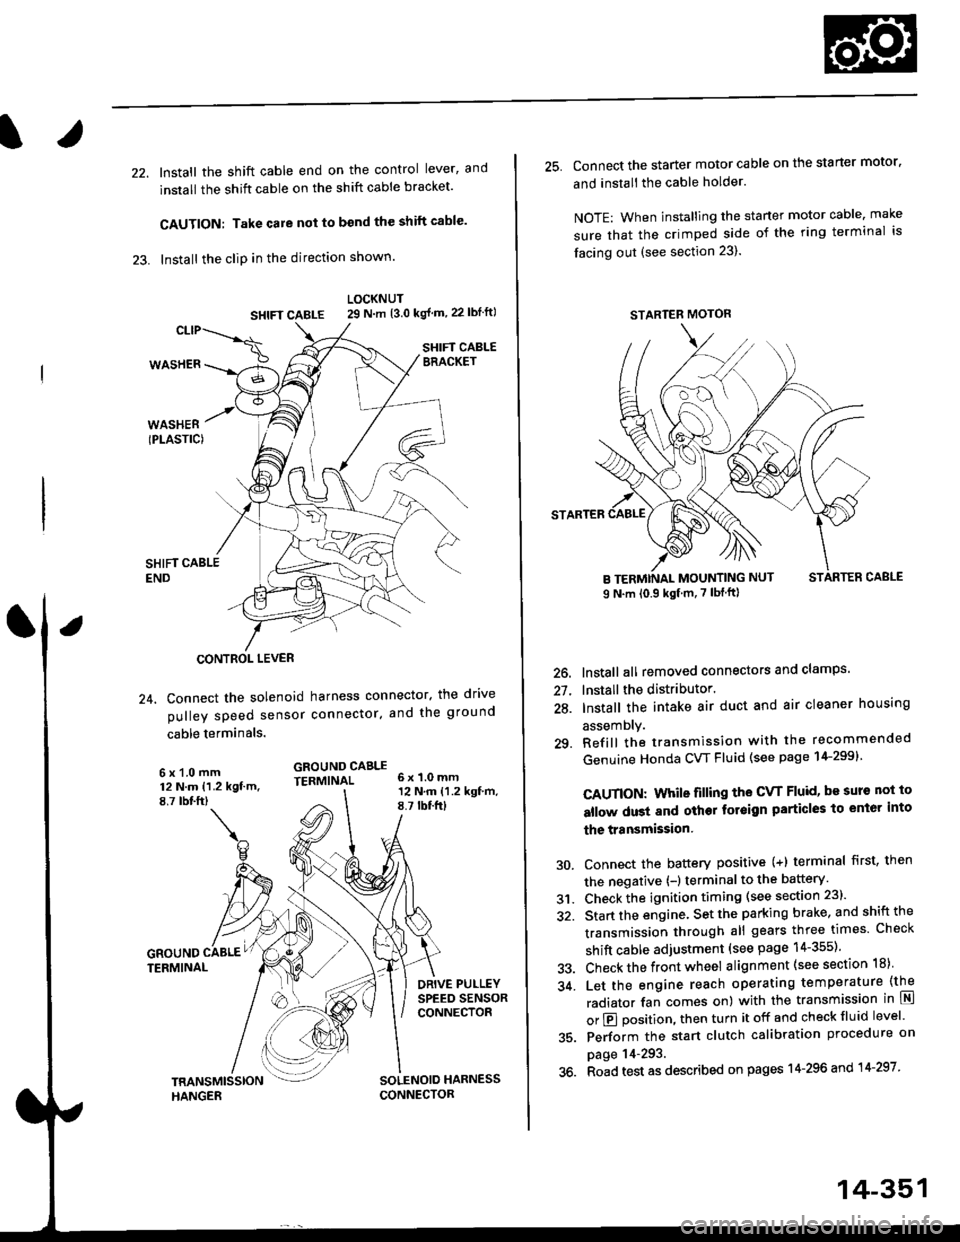 HONDA CIVIC 2000 6.G User Guide 22. Install the shift cable end on the control lever, and
install the shift cable on the shift cable bracket
CAUTION: Take care not to bend the shift cable
23. lnstall the clip in the direction show